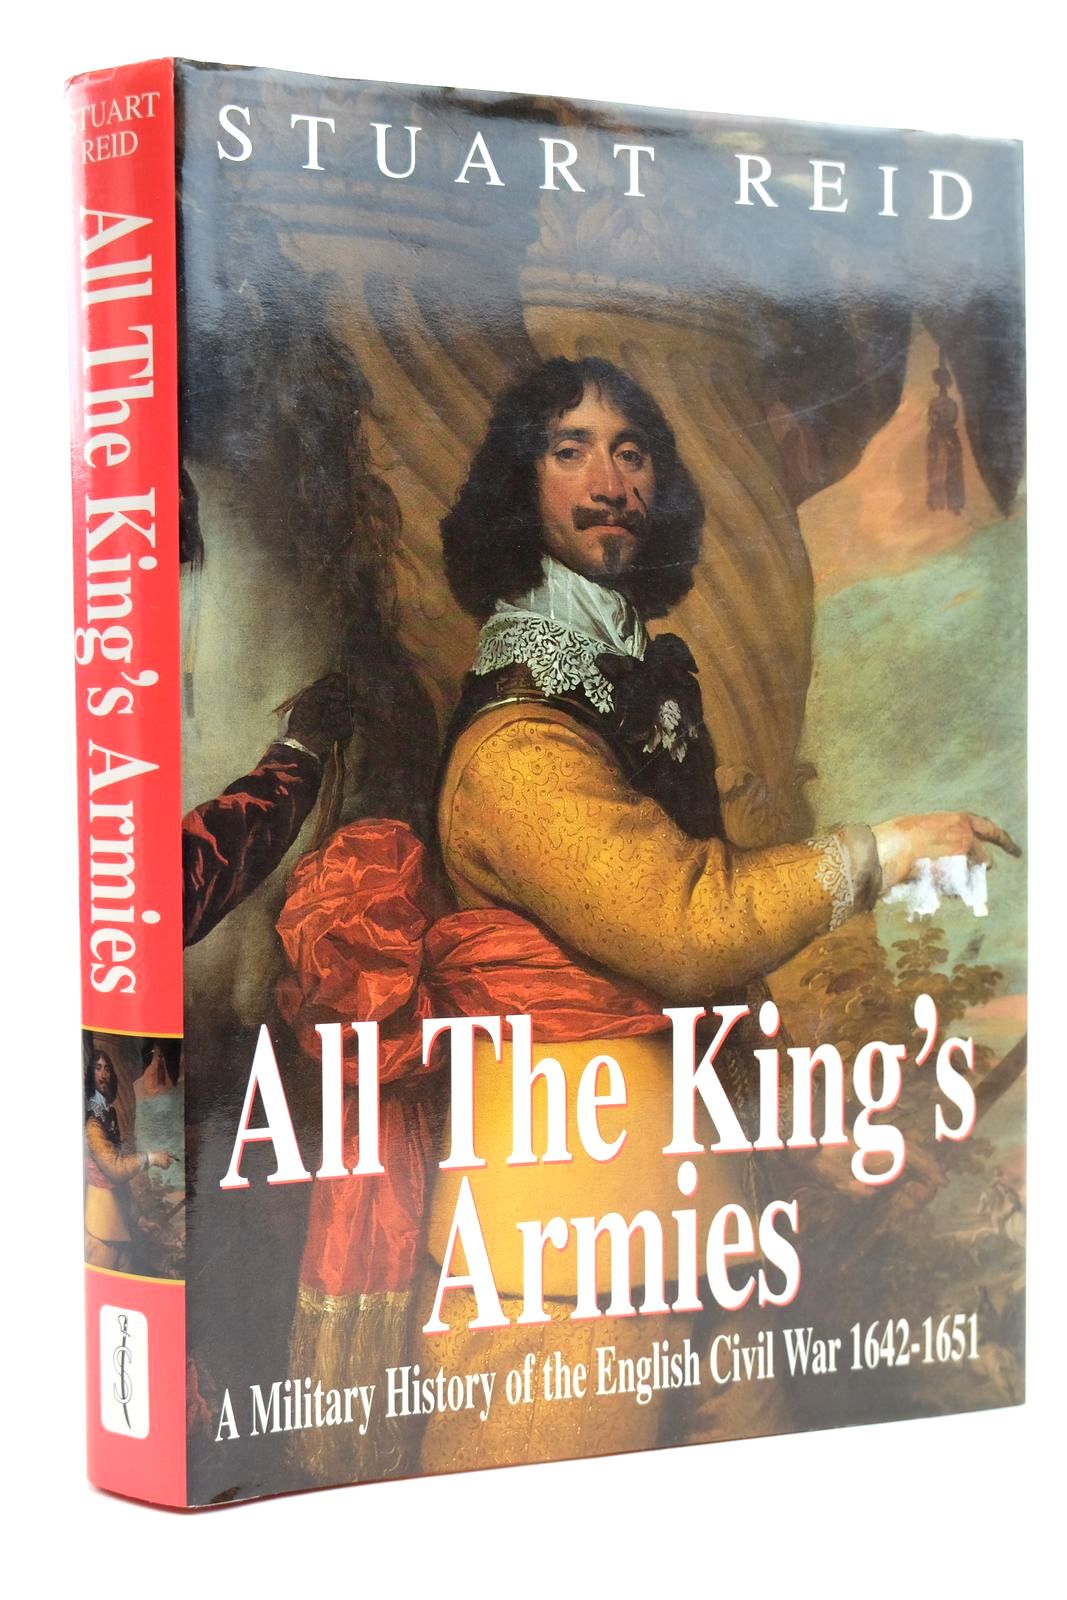 Photo of ALL THE KING'S ARMIES written by Reid, Stuart published by Spellmount Ltd. (STOCK CODE: 2131921)  for sale by Stella & Rose's Books